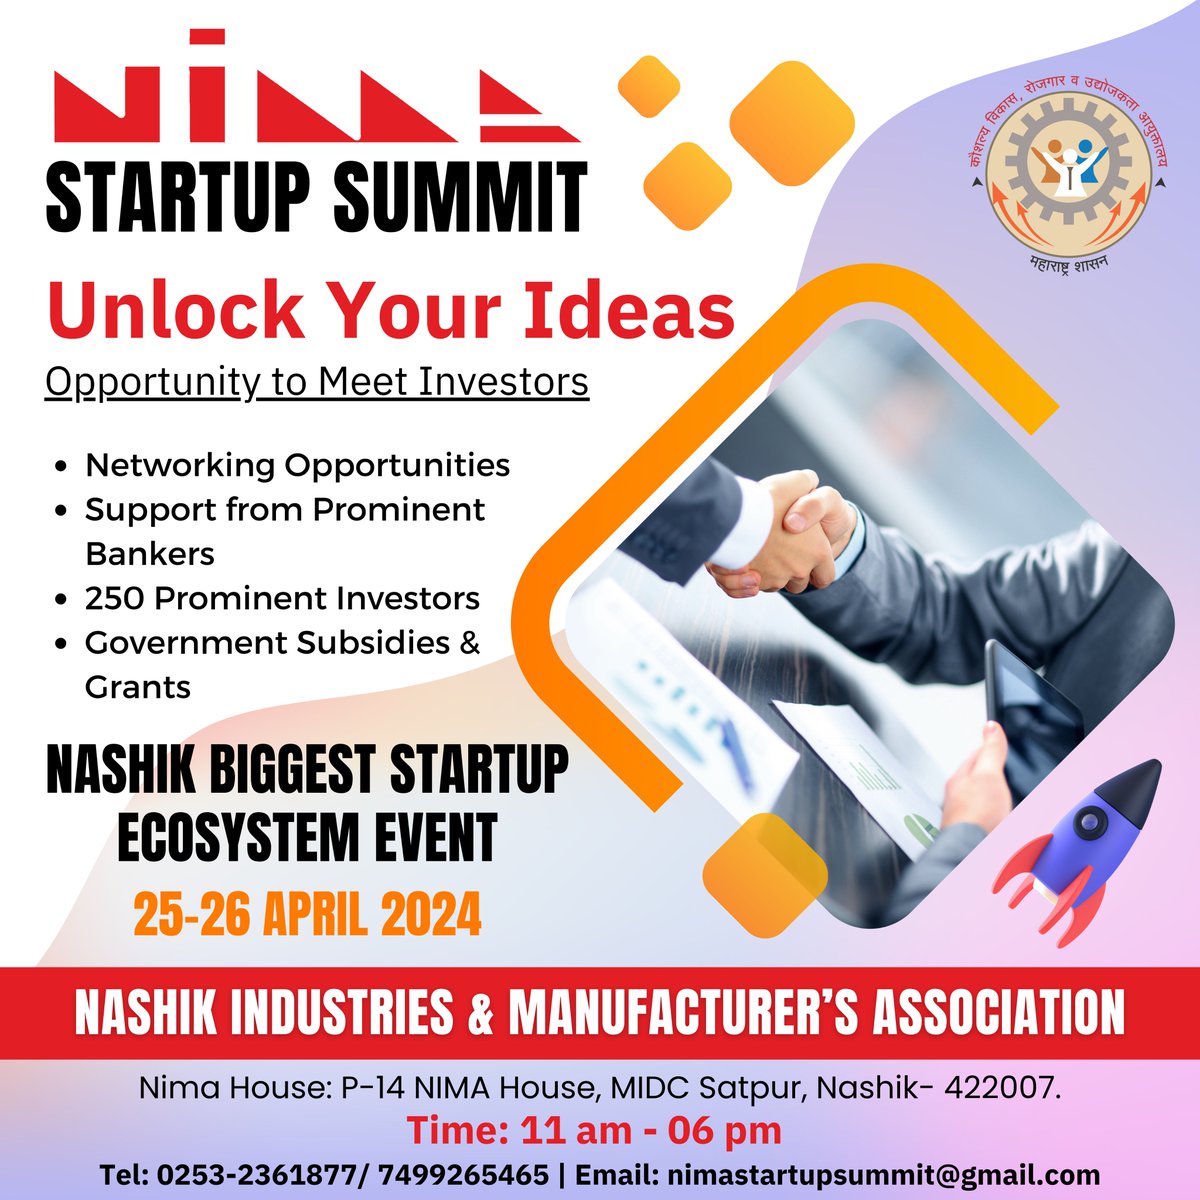 Are you ready to elevate your startup journey to new heights? Don't miss out on the opportunity of a lifetime! Mark your calendars and secure your spot at the most anticipated NIMA Startup Summit 2024 event of the year! #StartupSummit #Entrepreneurship #Innovation #Networking